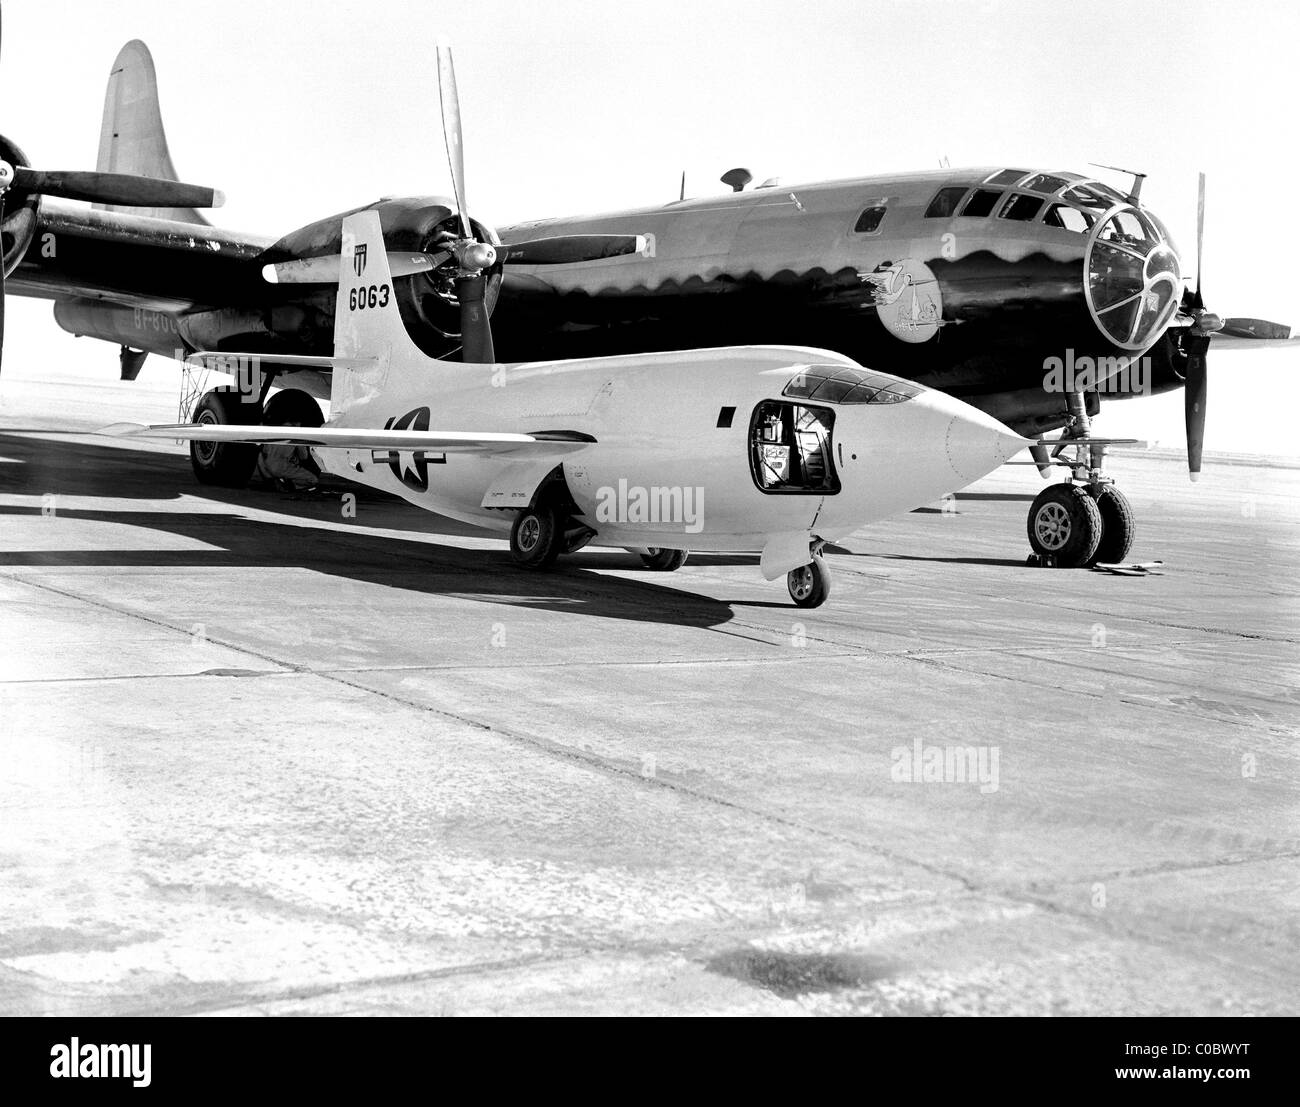 Bell Aircraft Corporation X-1-2 sitting on the ramp at NACA High- Speed Flight Research Station with Boeing B-29 launch plane Stock Photo